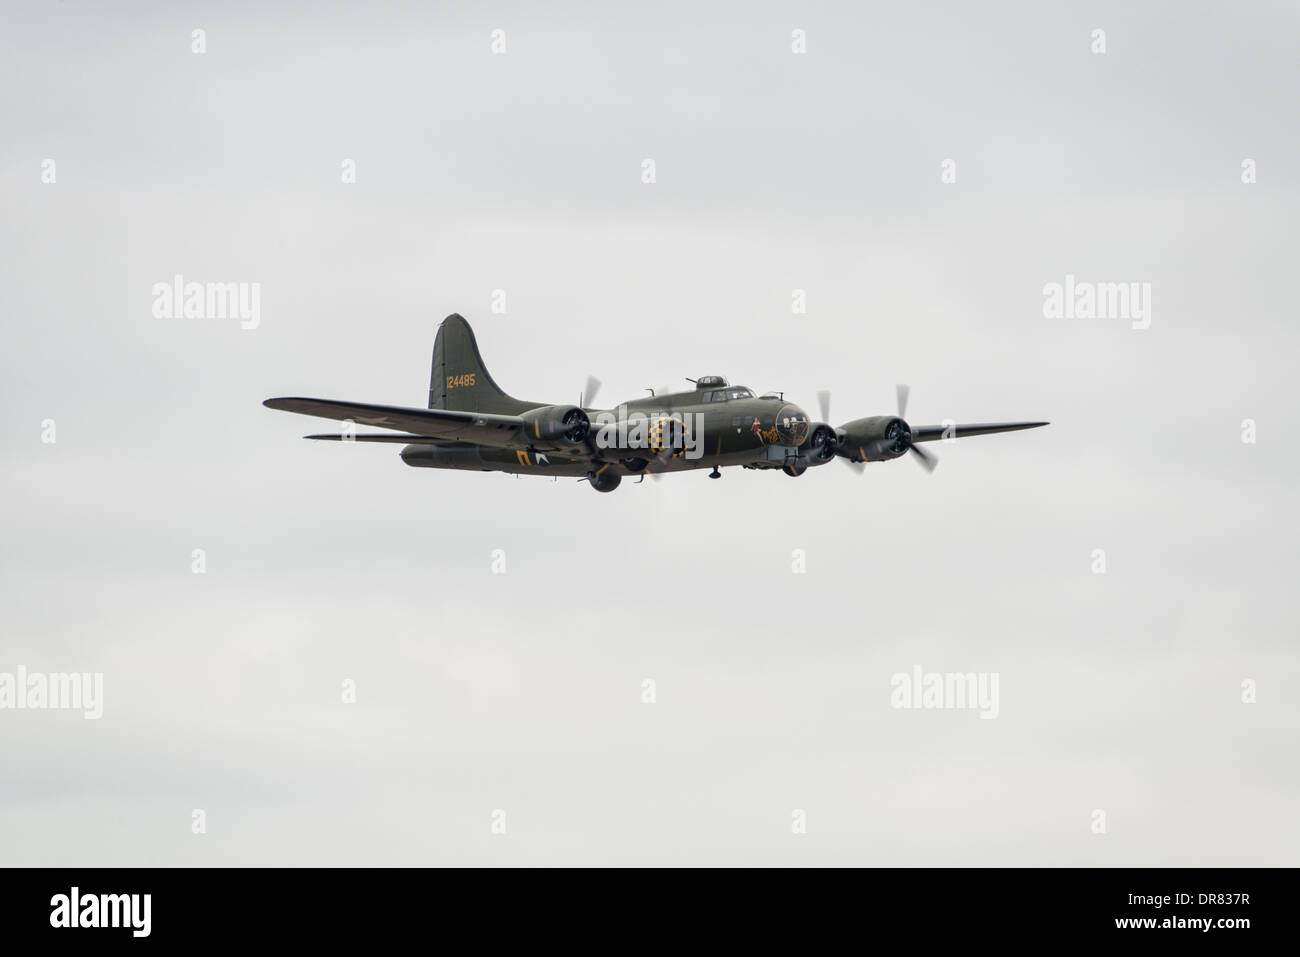 Iconic American World War Two Heavy Bomber Aircraft the B-17 named Sally B displays at 2013 Royal International Air Tattoo Stock Photo